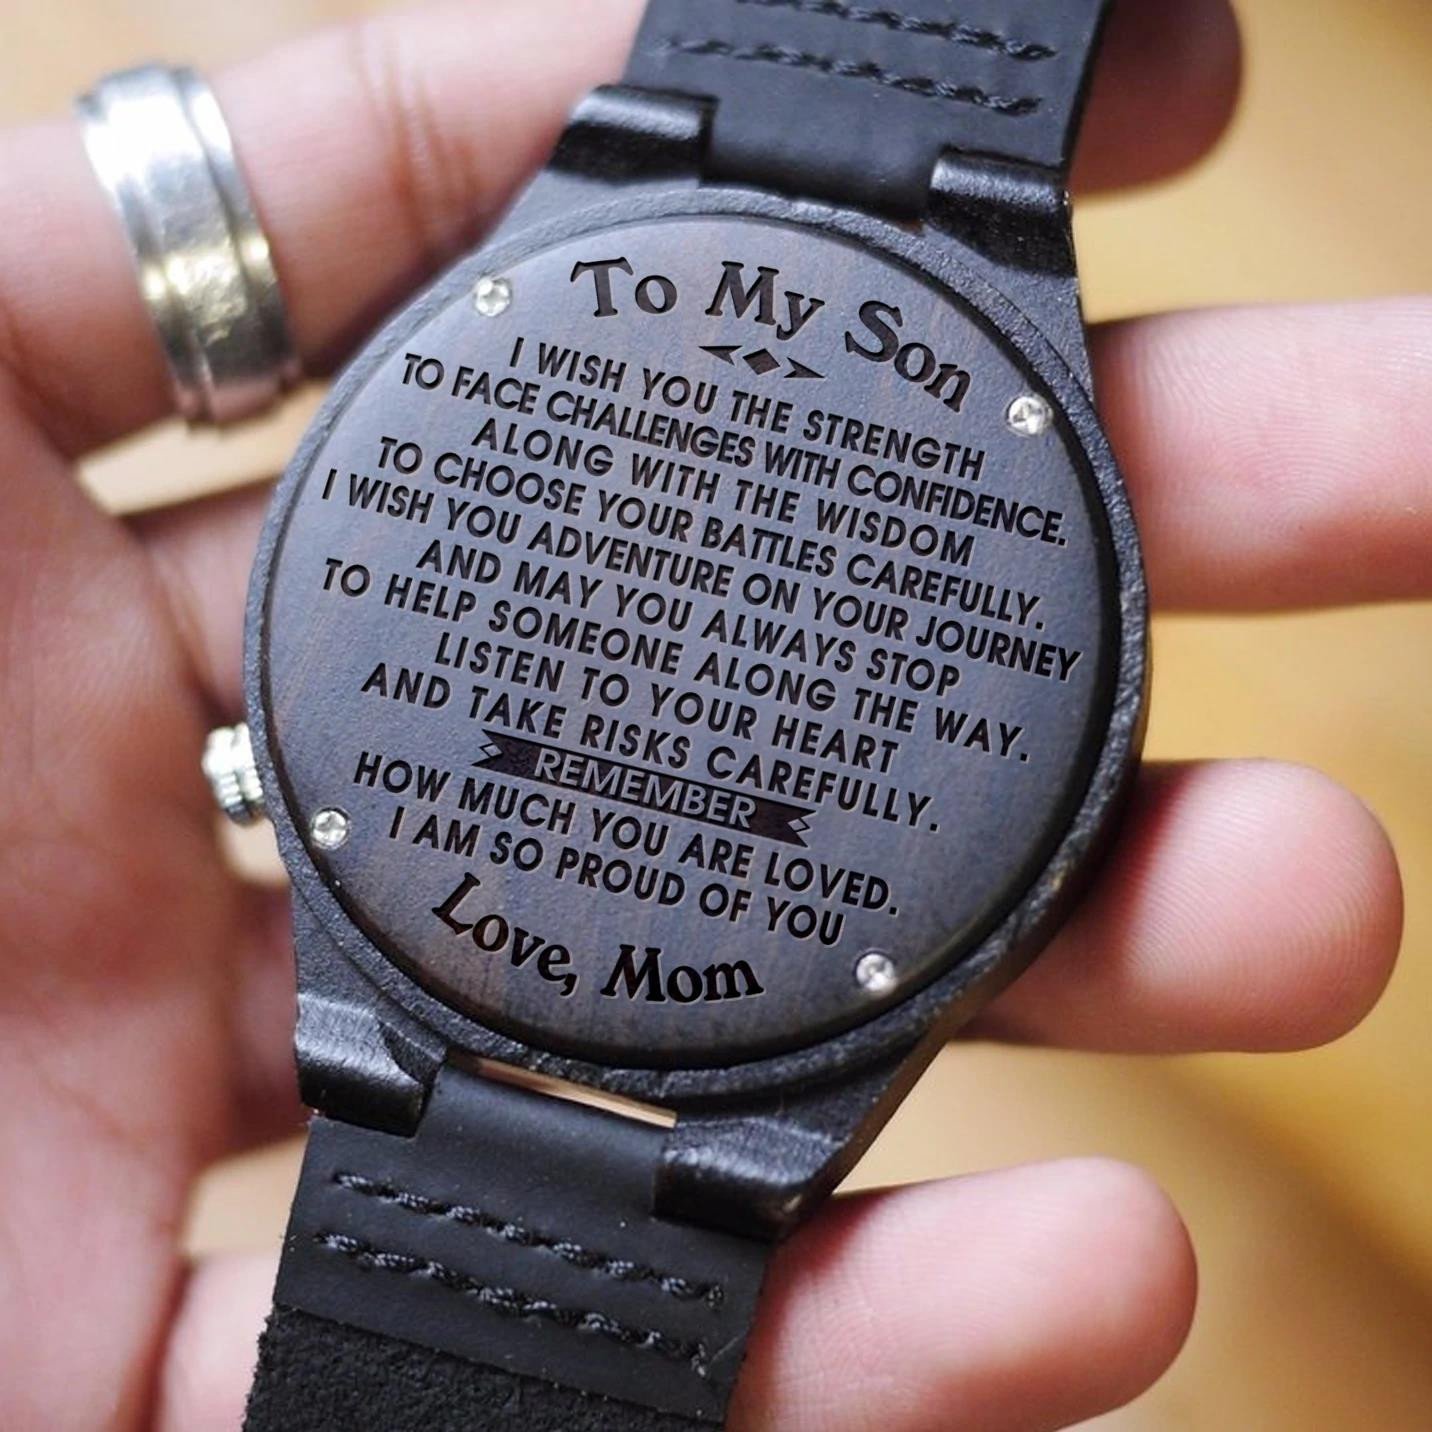 Listen To Your Heart Take Risks Carefully Engraved Wooden Watch Gift For Son